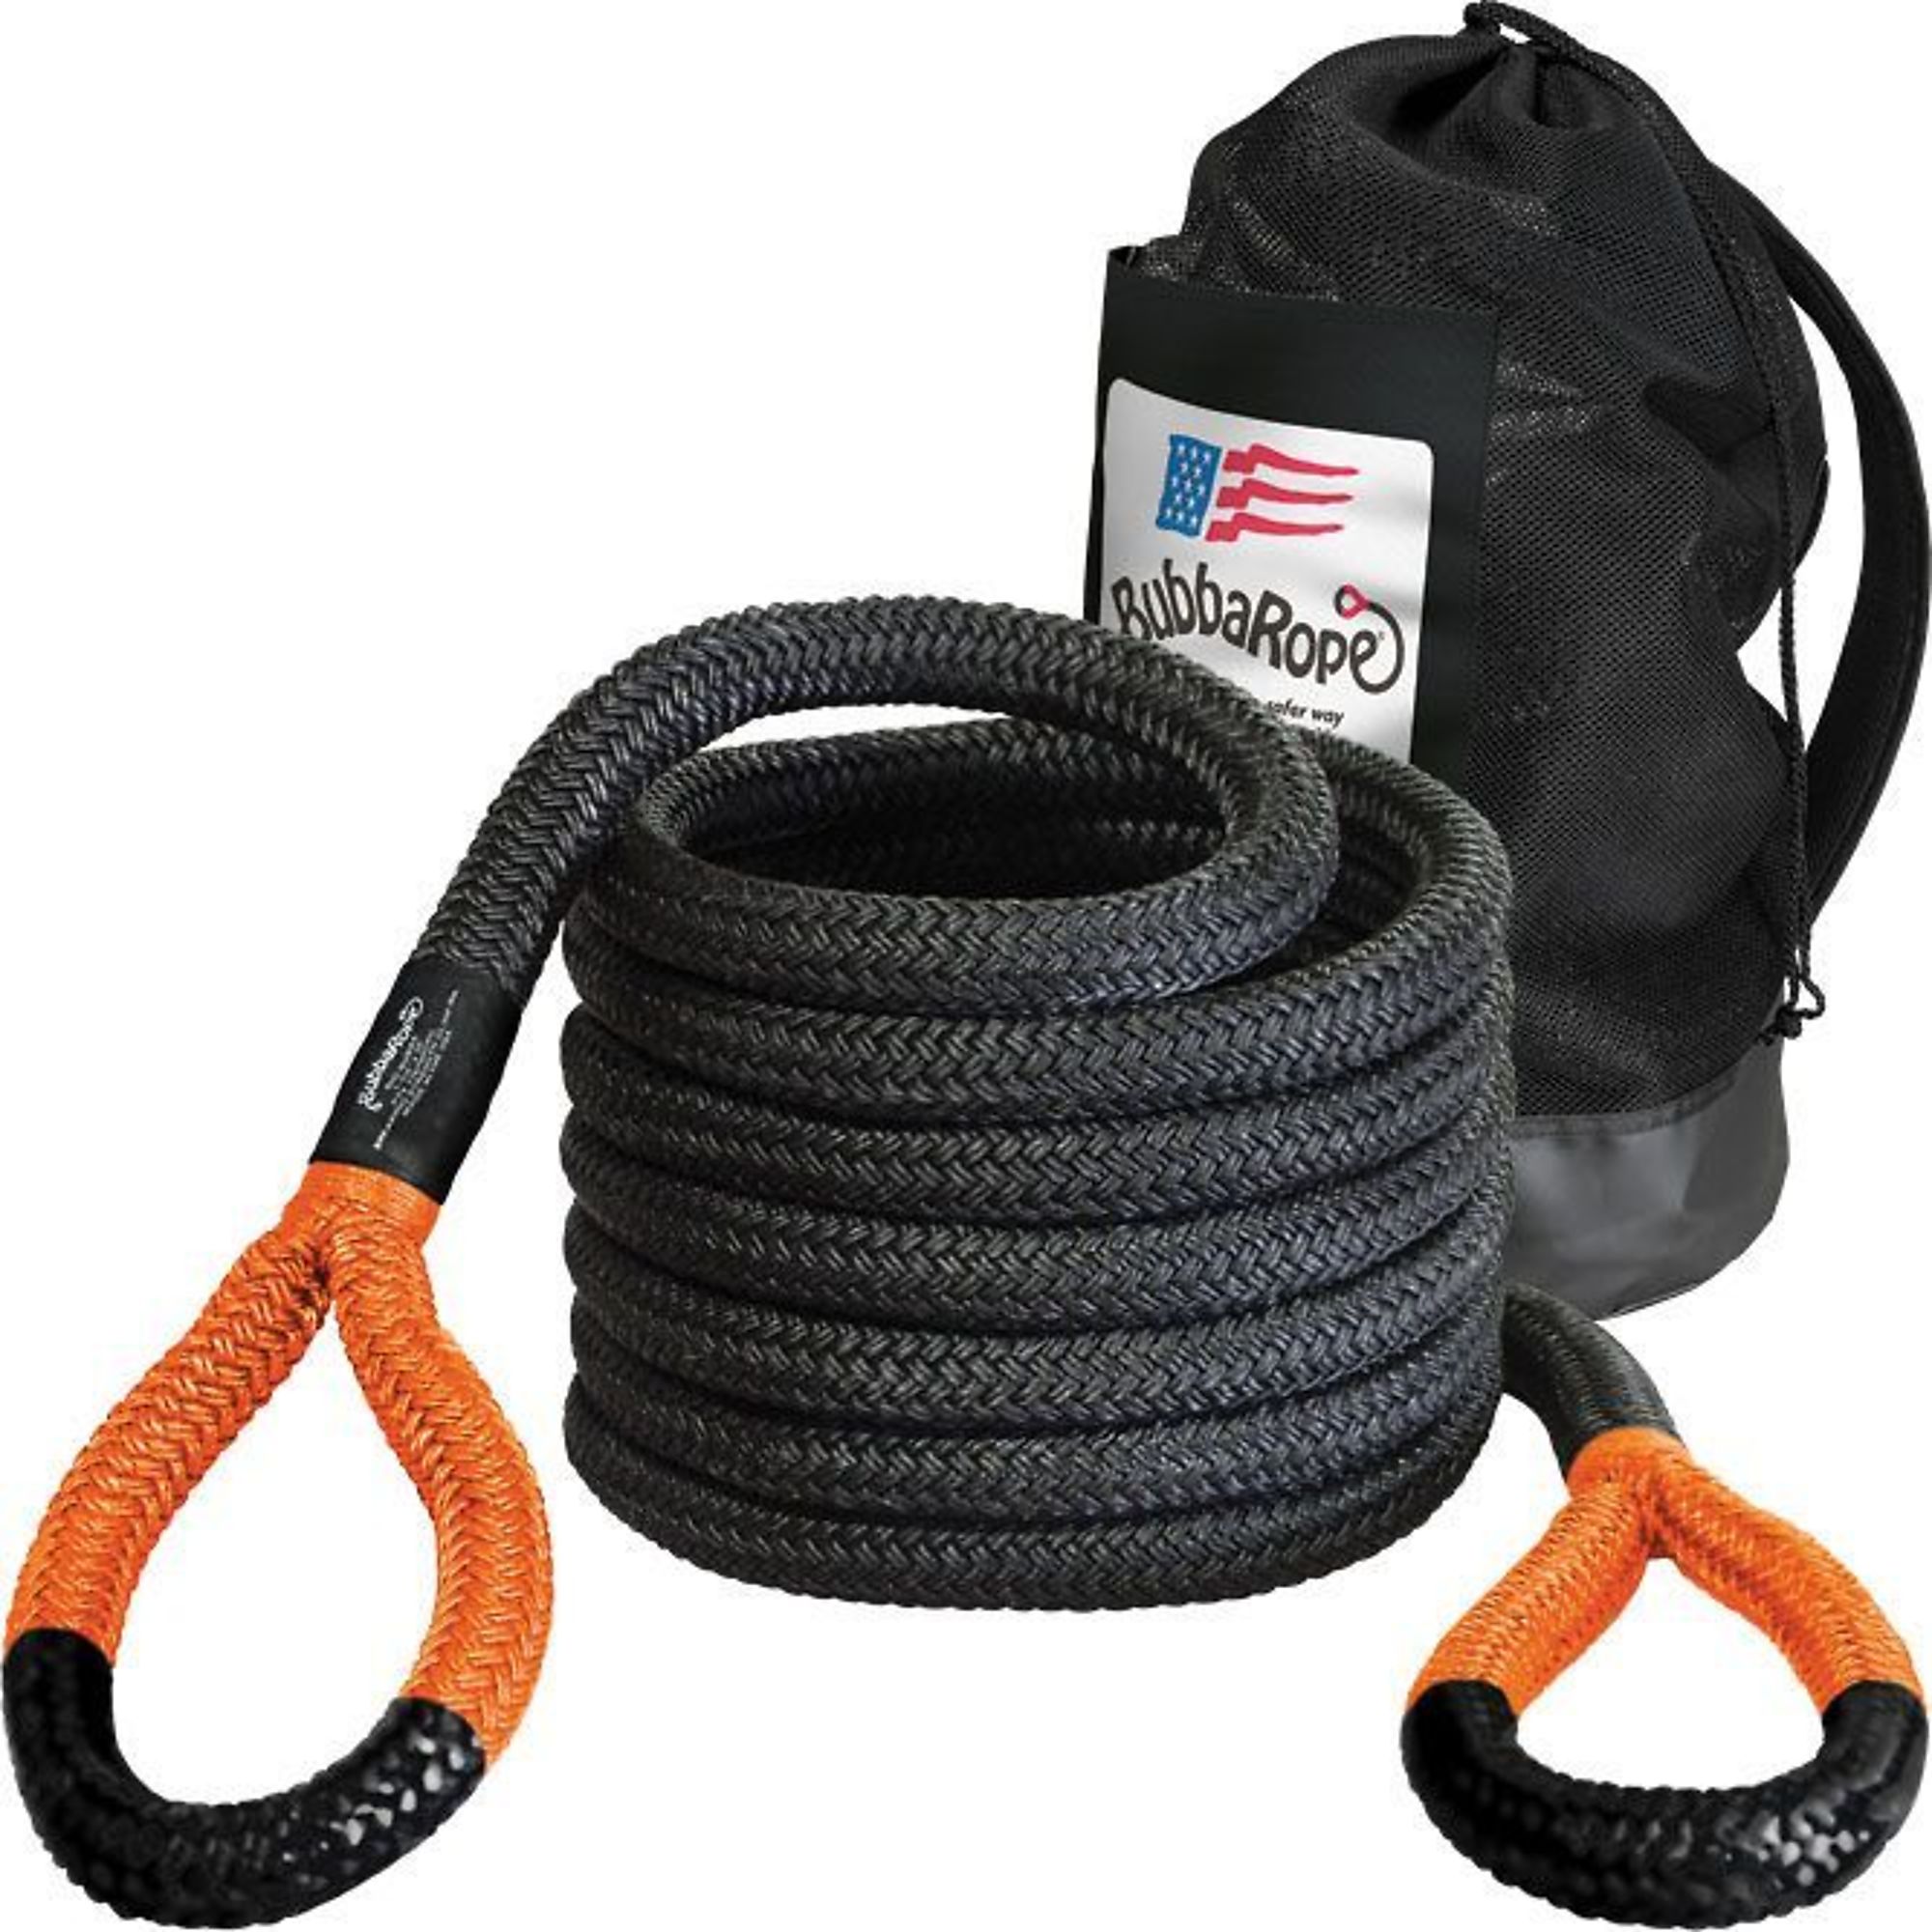 Bubba Rope, The Best Power Stretch Rope for Lrg Trucks, Length 360 in, Material HMPE, Model 176720ORG